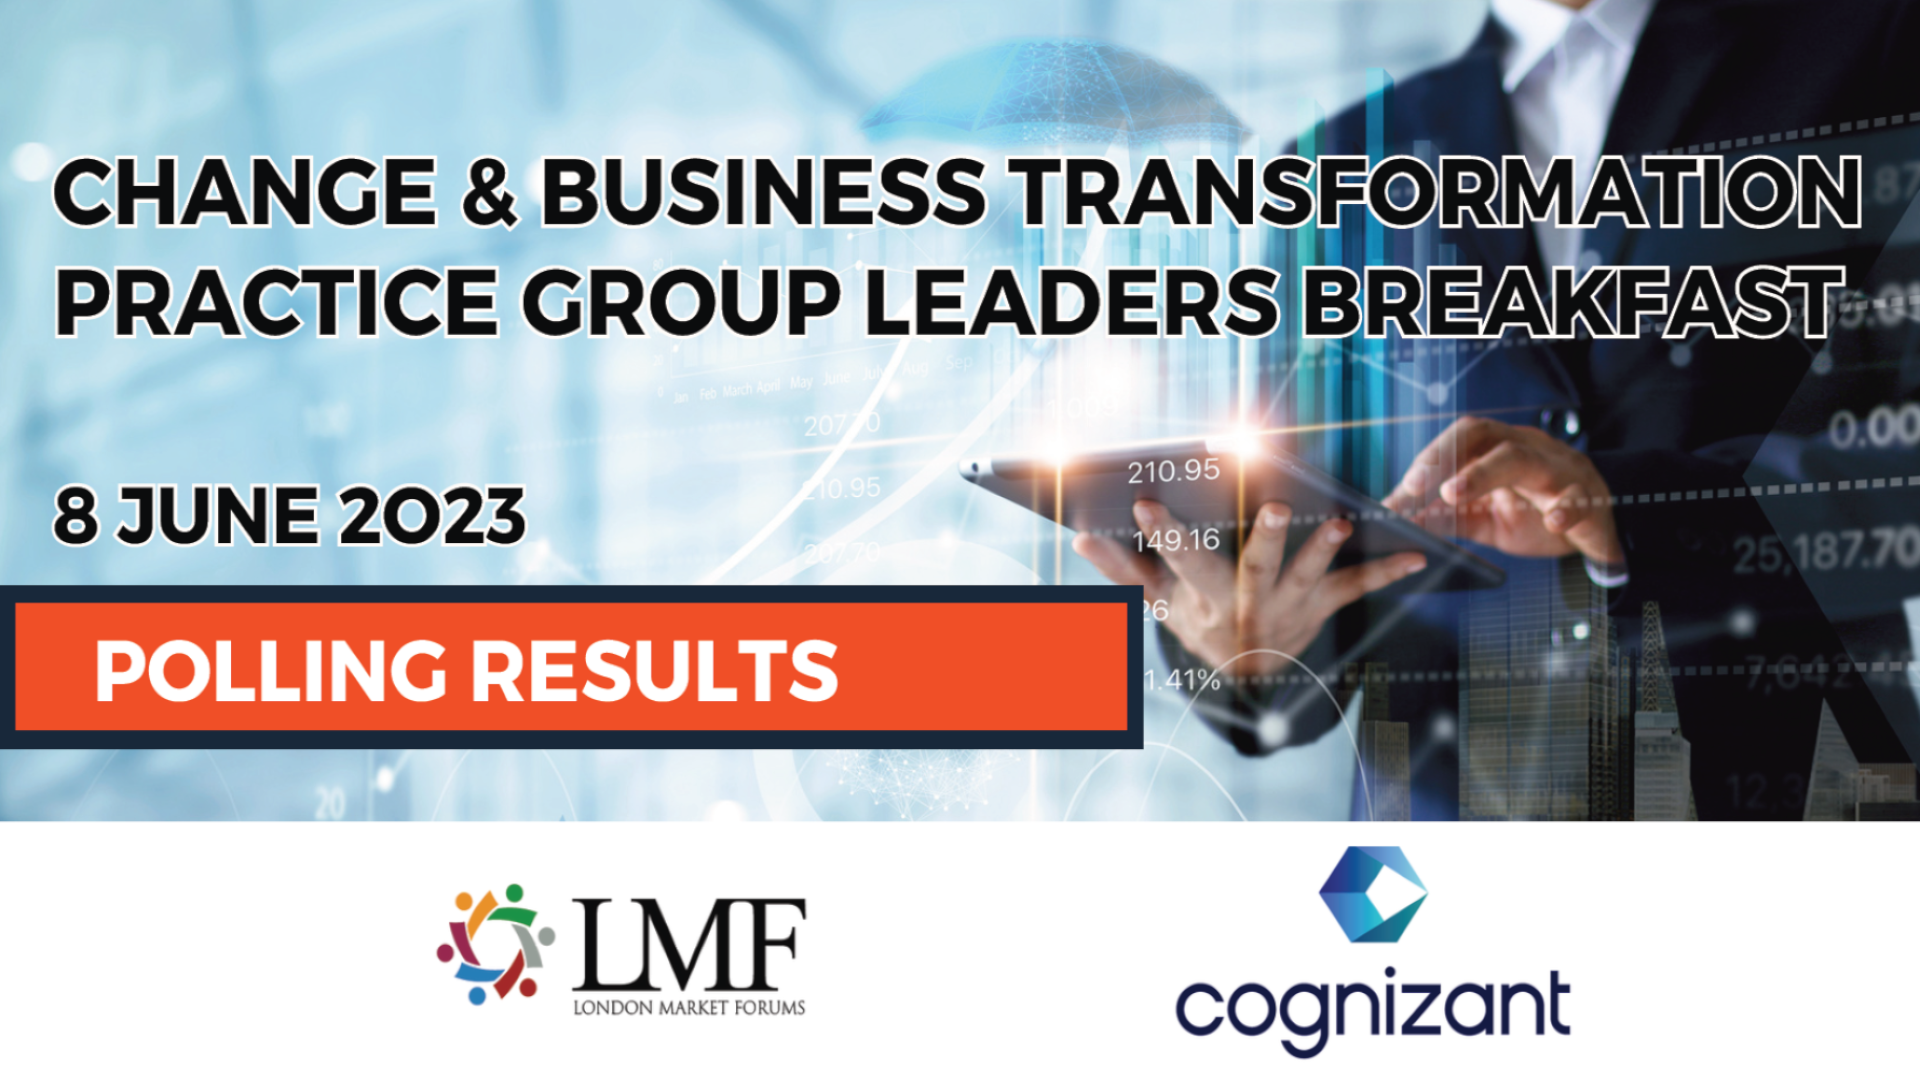 Change and Business Transformation Leaders Practice Group